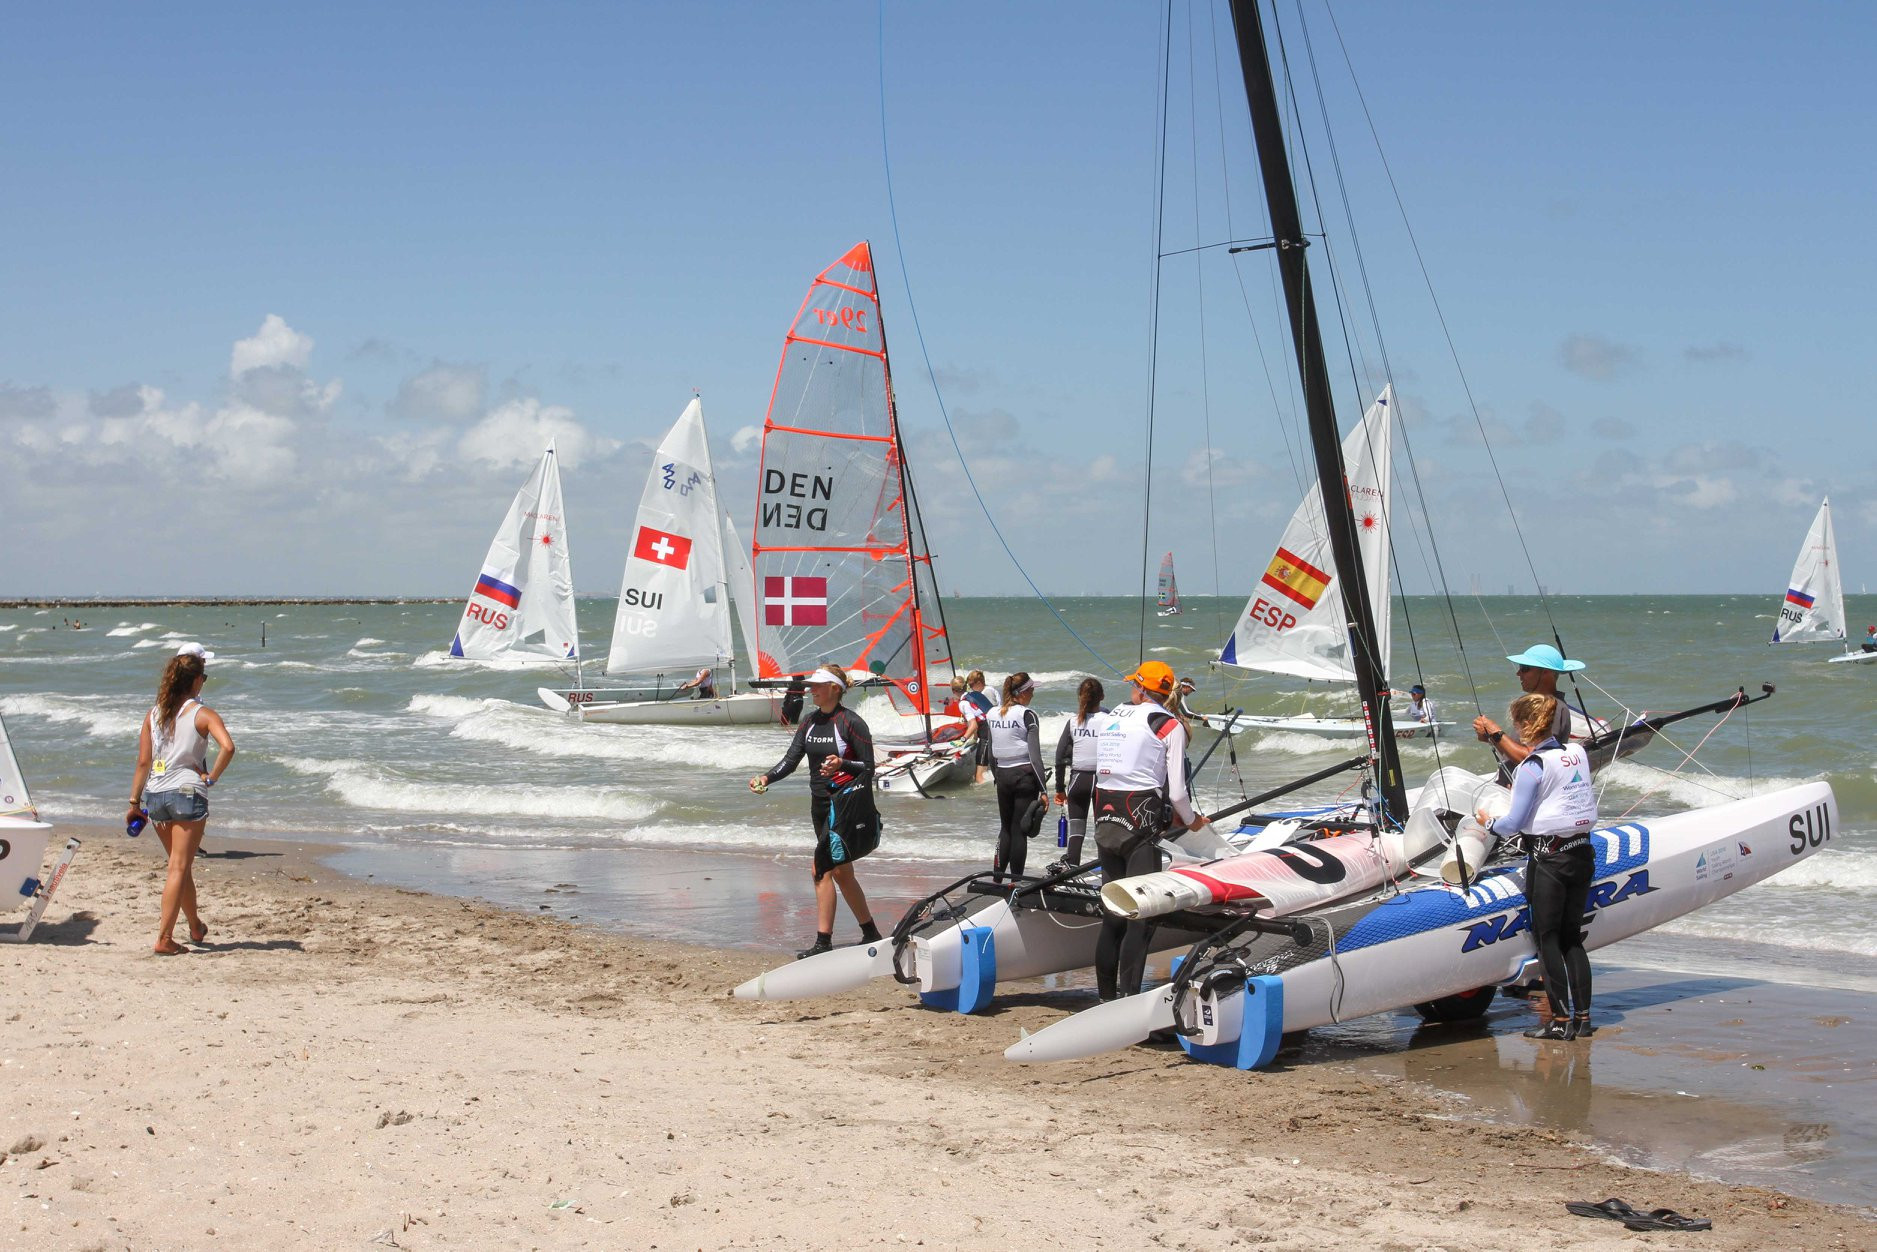 Competition will take place over five days in the United States ©World Sailing